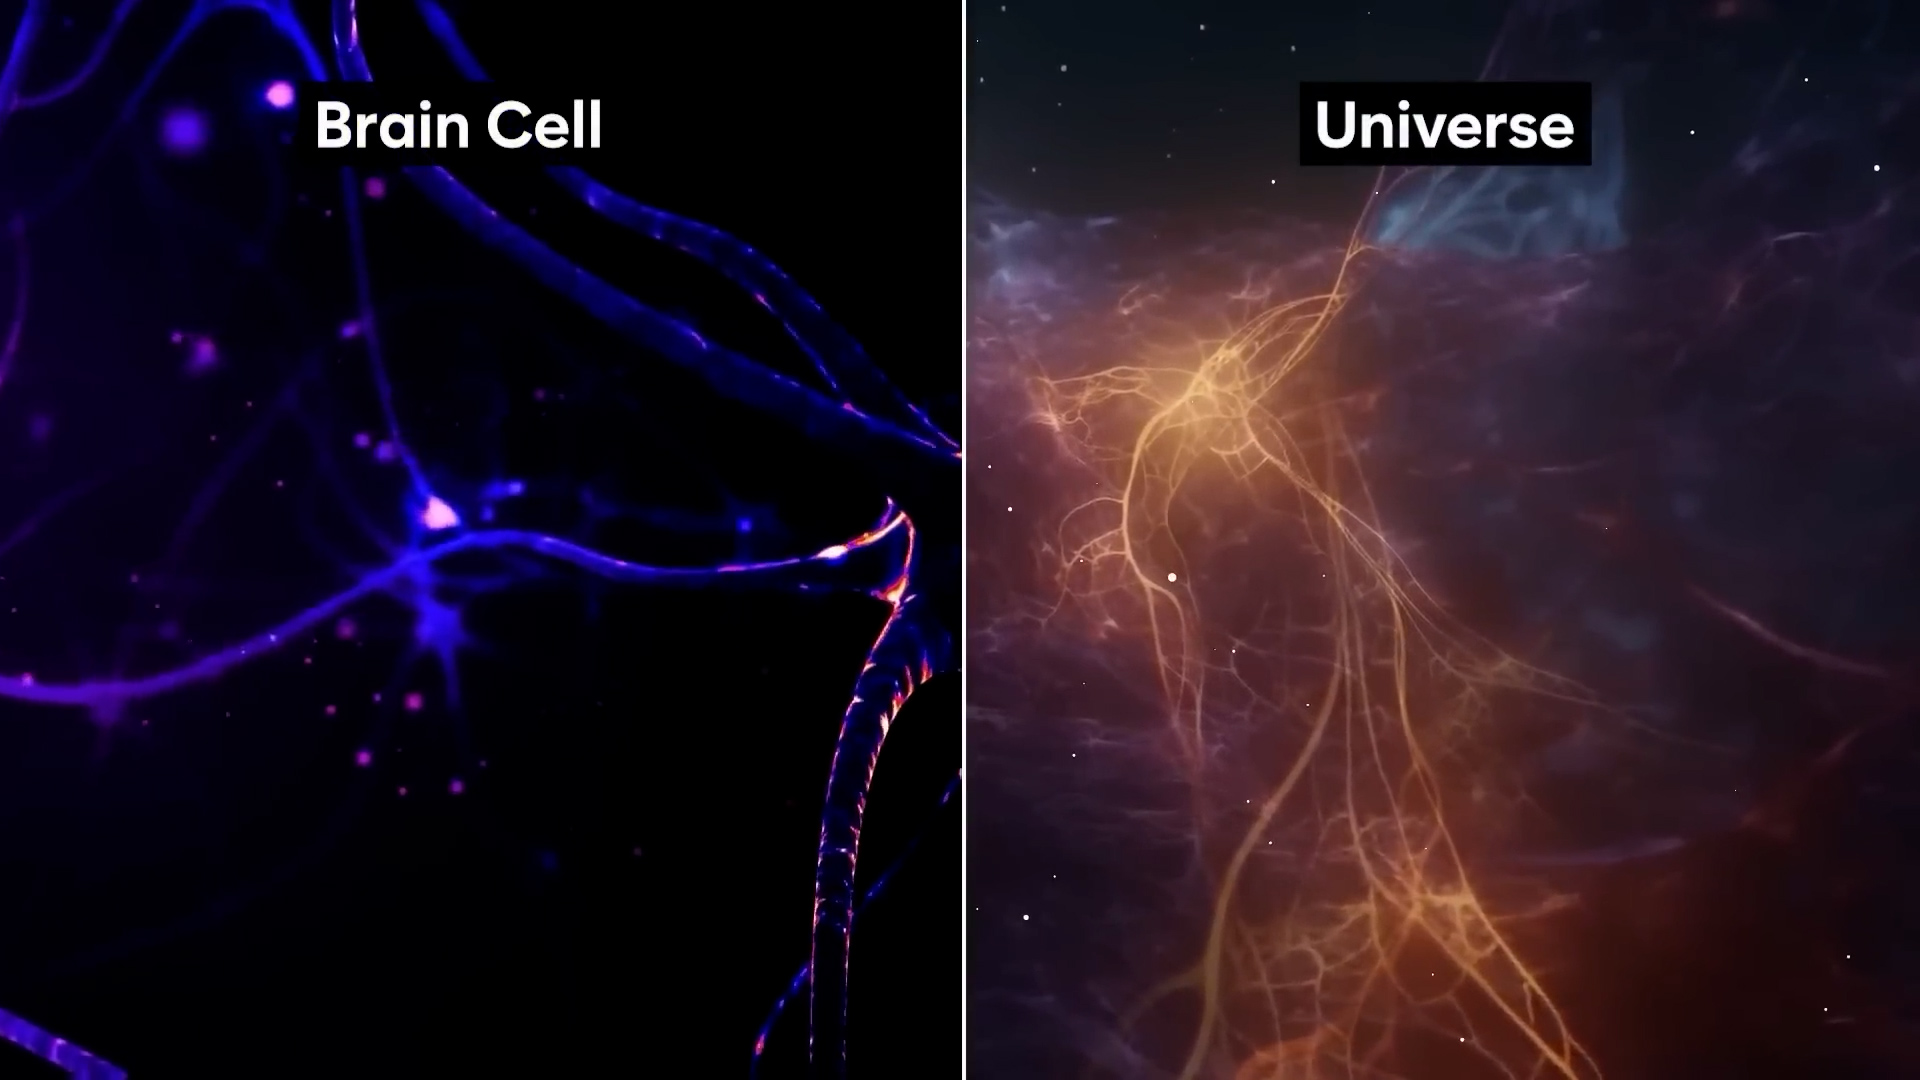 Does your brain connect with the universe? Do you know 10 facts about your Brian and Galaxy?